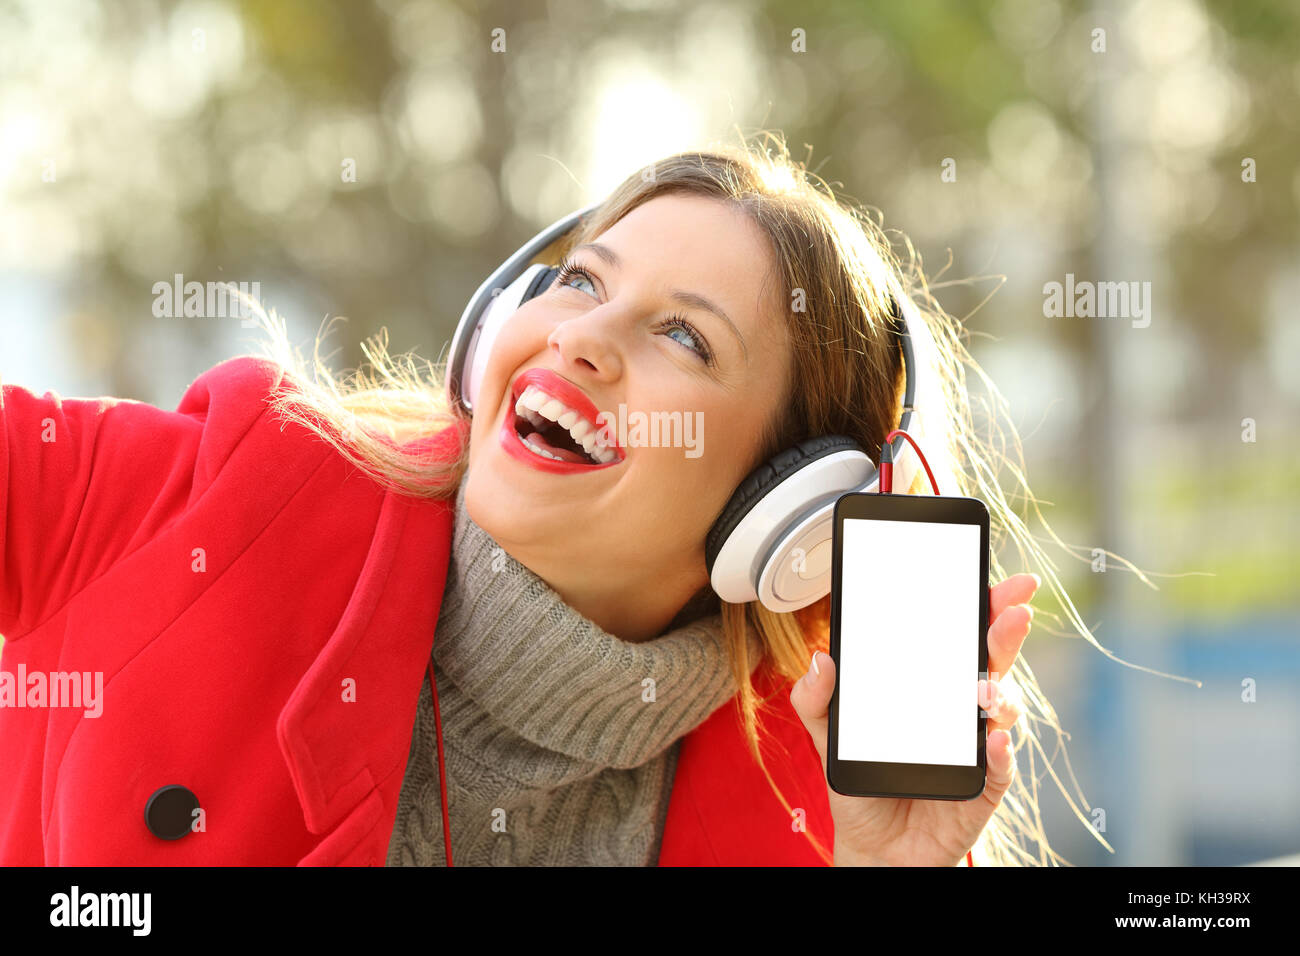 Happy girl wearing red jacket and headphones listening to music and showing smartphone screen in a park in winter Stock Photo